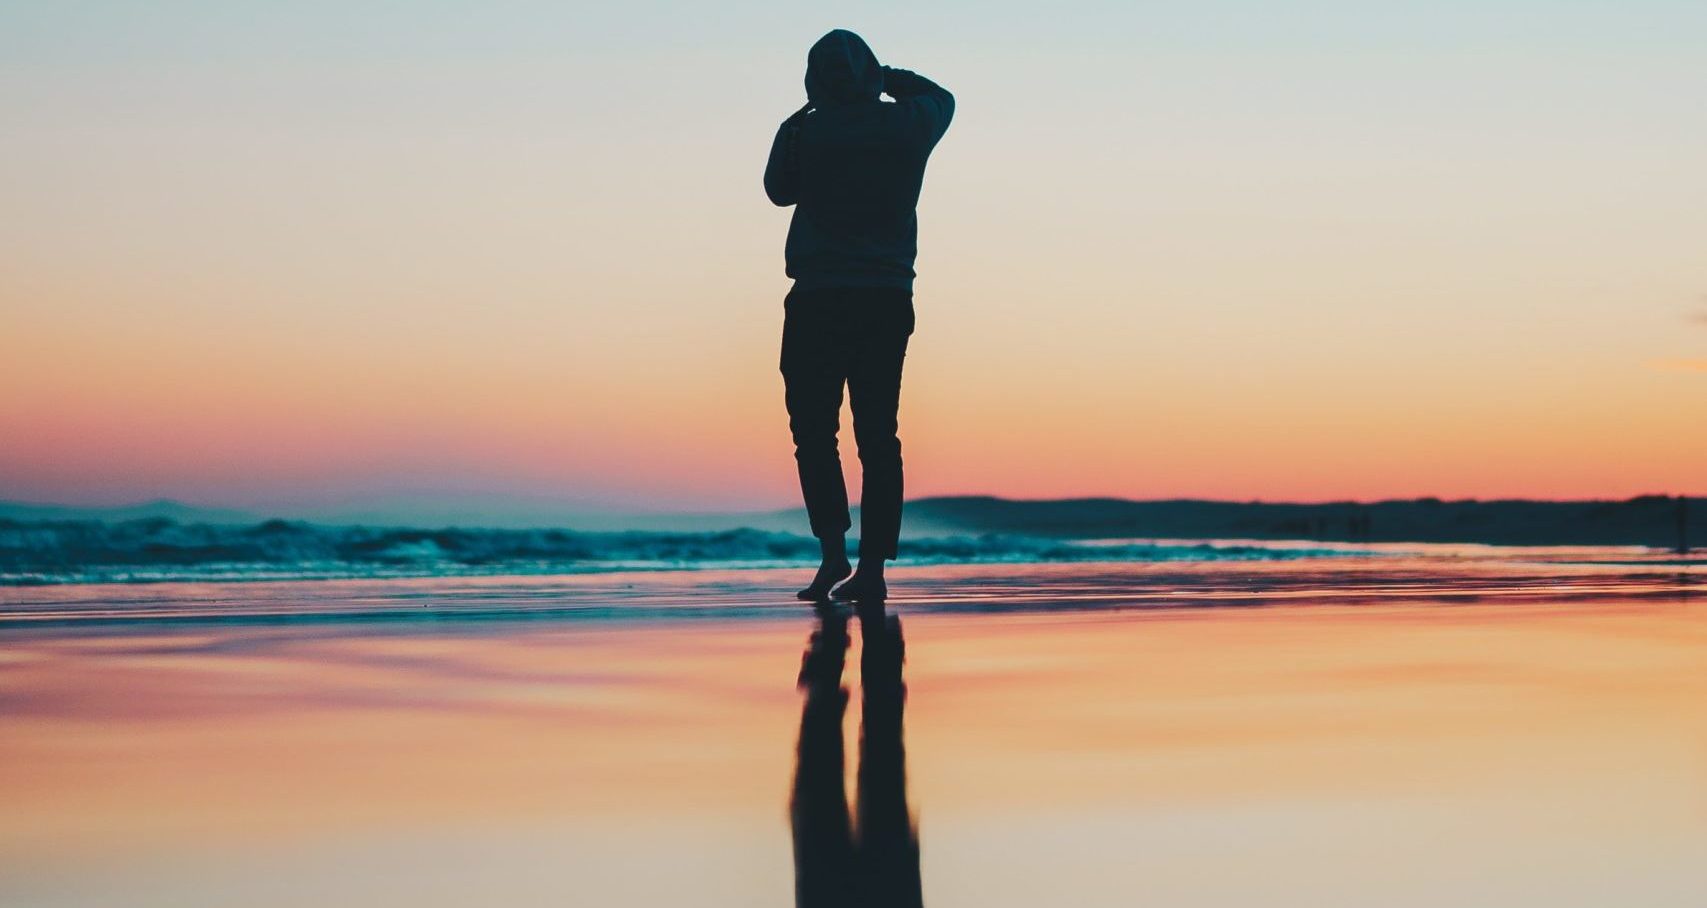 A silhouetted person takes a picture of the ocean as the sun sets. The sunset and the person are reflected in the wet sand.